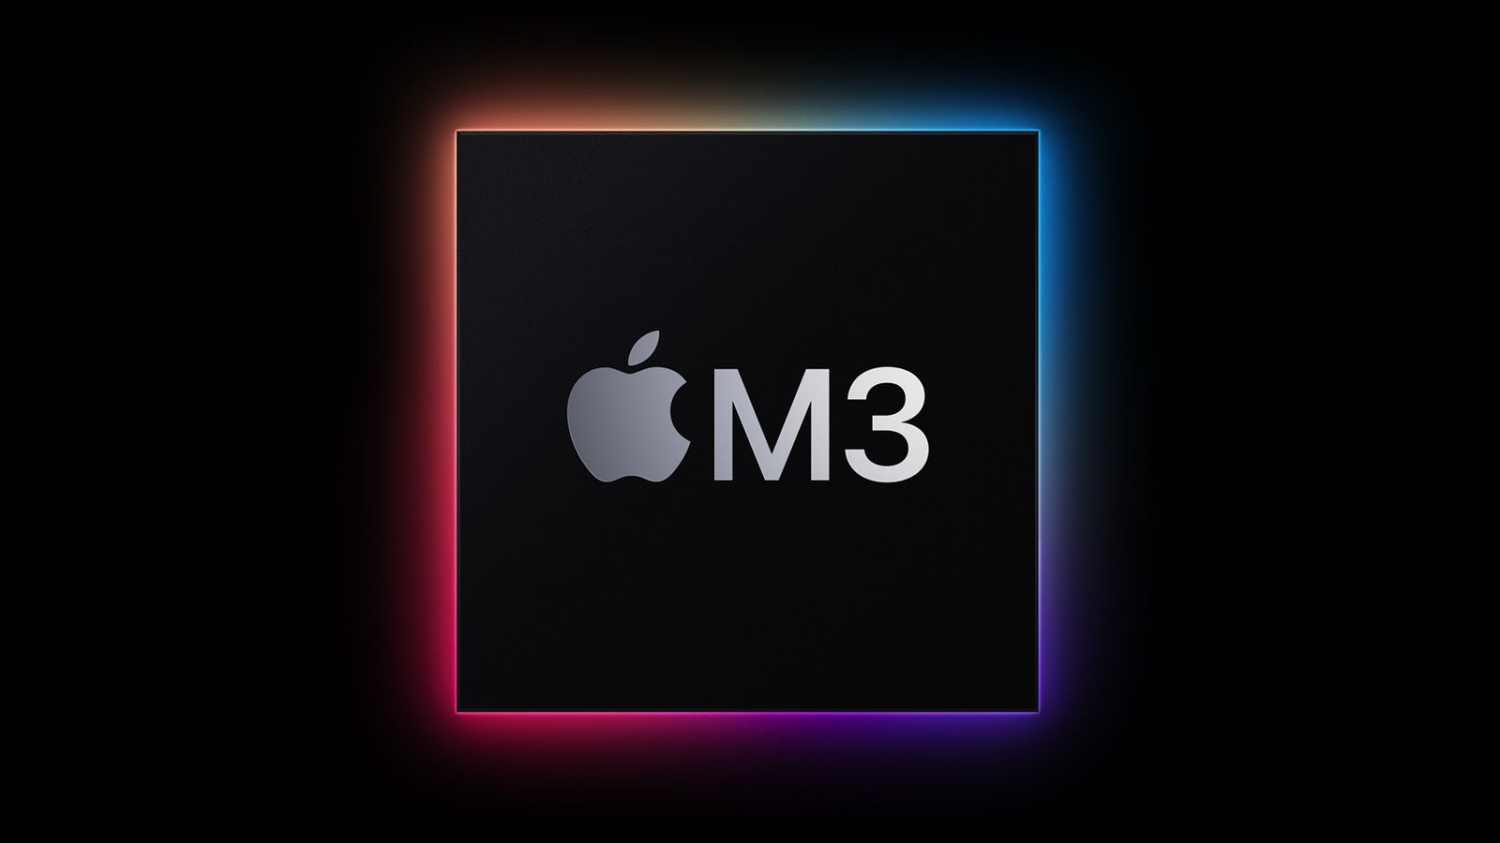  A black square with rounded corners has an Apple logo and 'M3' text on its front, representing the new MacBook Air with the M3 chip.